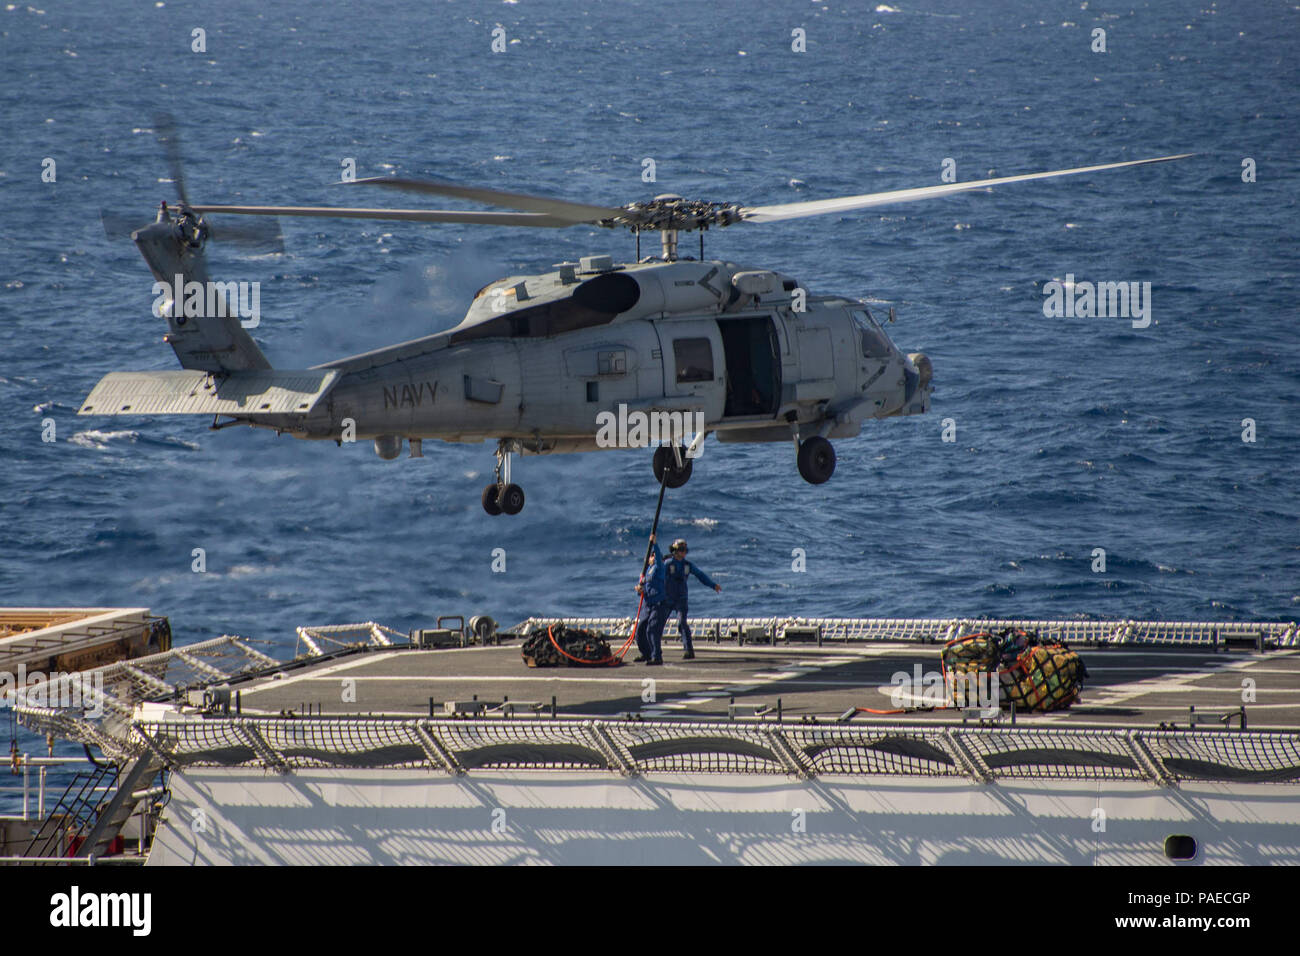 160325-N-VX726-038  PACIFIC OCEAN (March 25, 2016) U.S. Coast Guardsmen assigned to the Legend-class national security cutter USCGC Waesche (WMSL 751) connect a pallet to an MH-60R helicopter assigned to the 'Jaguars' of Helicopter Maritime Strike Squadron (HSM) 60 during a vertical replenishment (VERTREP) with the Arleigh Burke-class guided-missile destroyer USS Lassen (DDG 82) in the eastern Pacific Ocean. Lassen is currently underway in support of Operation Martillo, a joint operation with the U.S. Coast Guard and partner nations within the 4th Fleet area of responsibility. Operation Martil Stock Photo